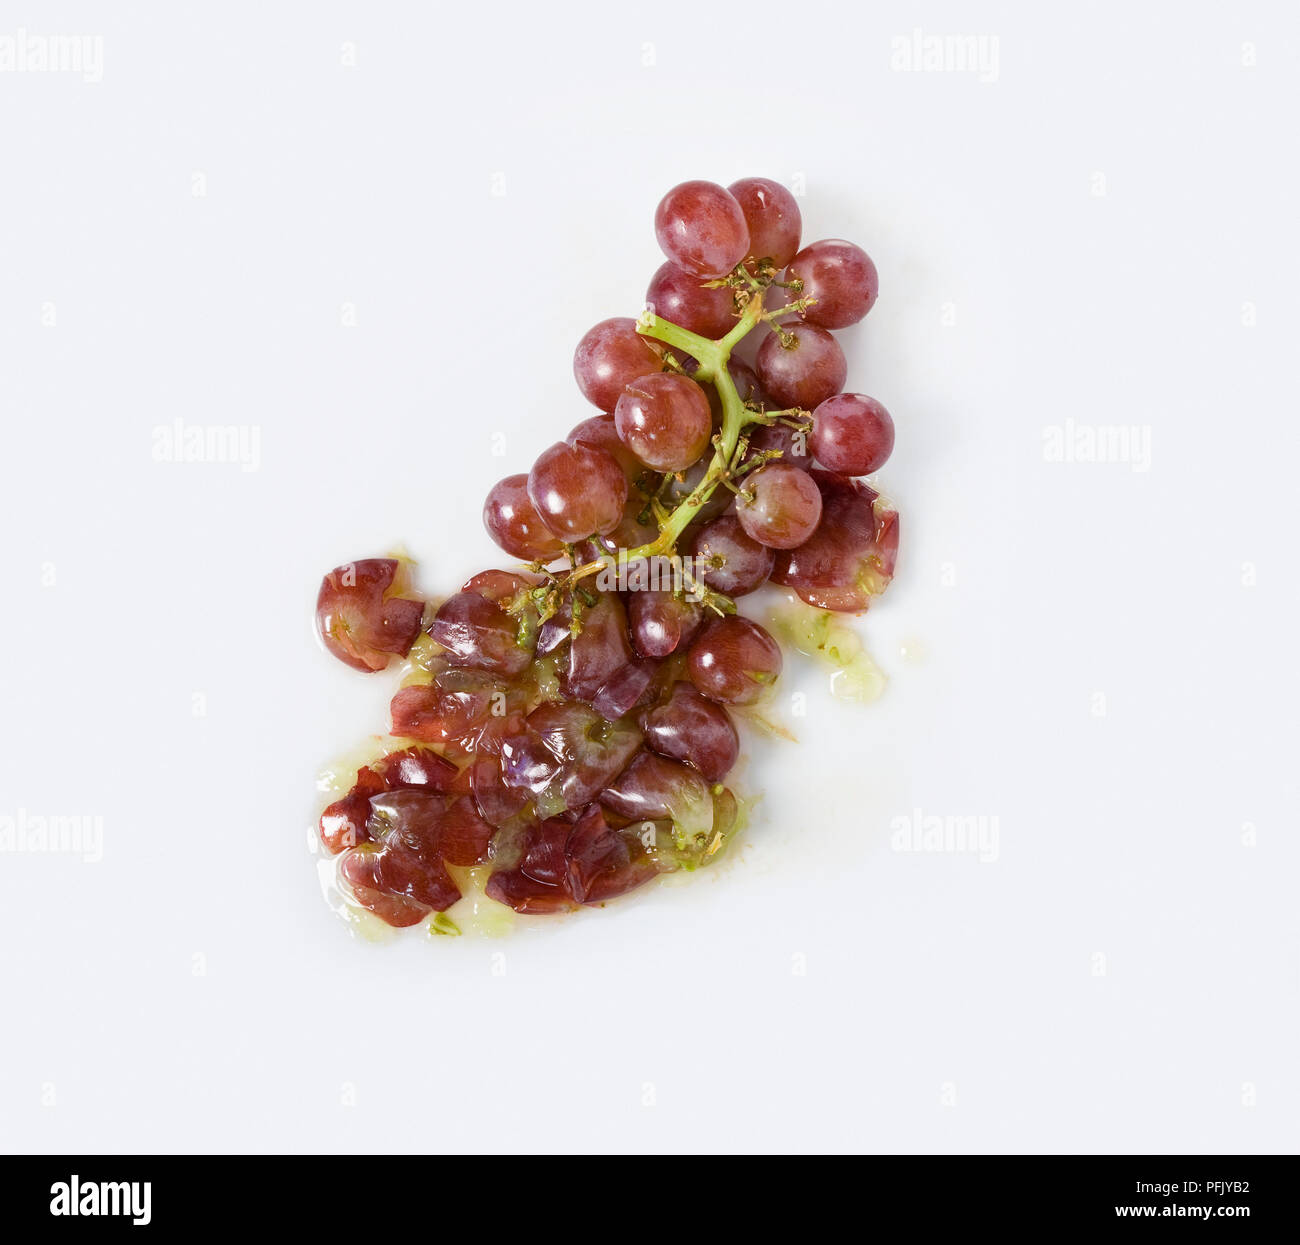 Crushed red grapes Stock Photo